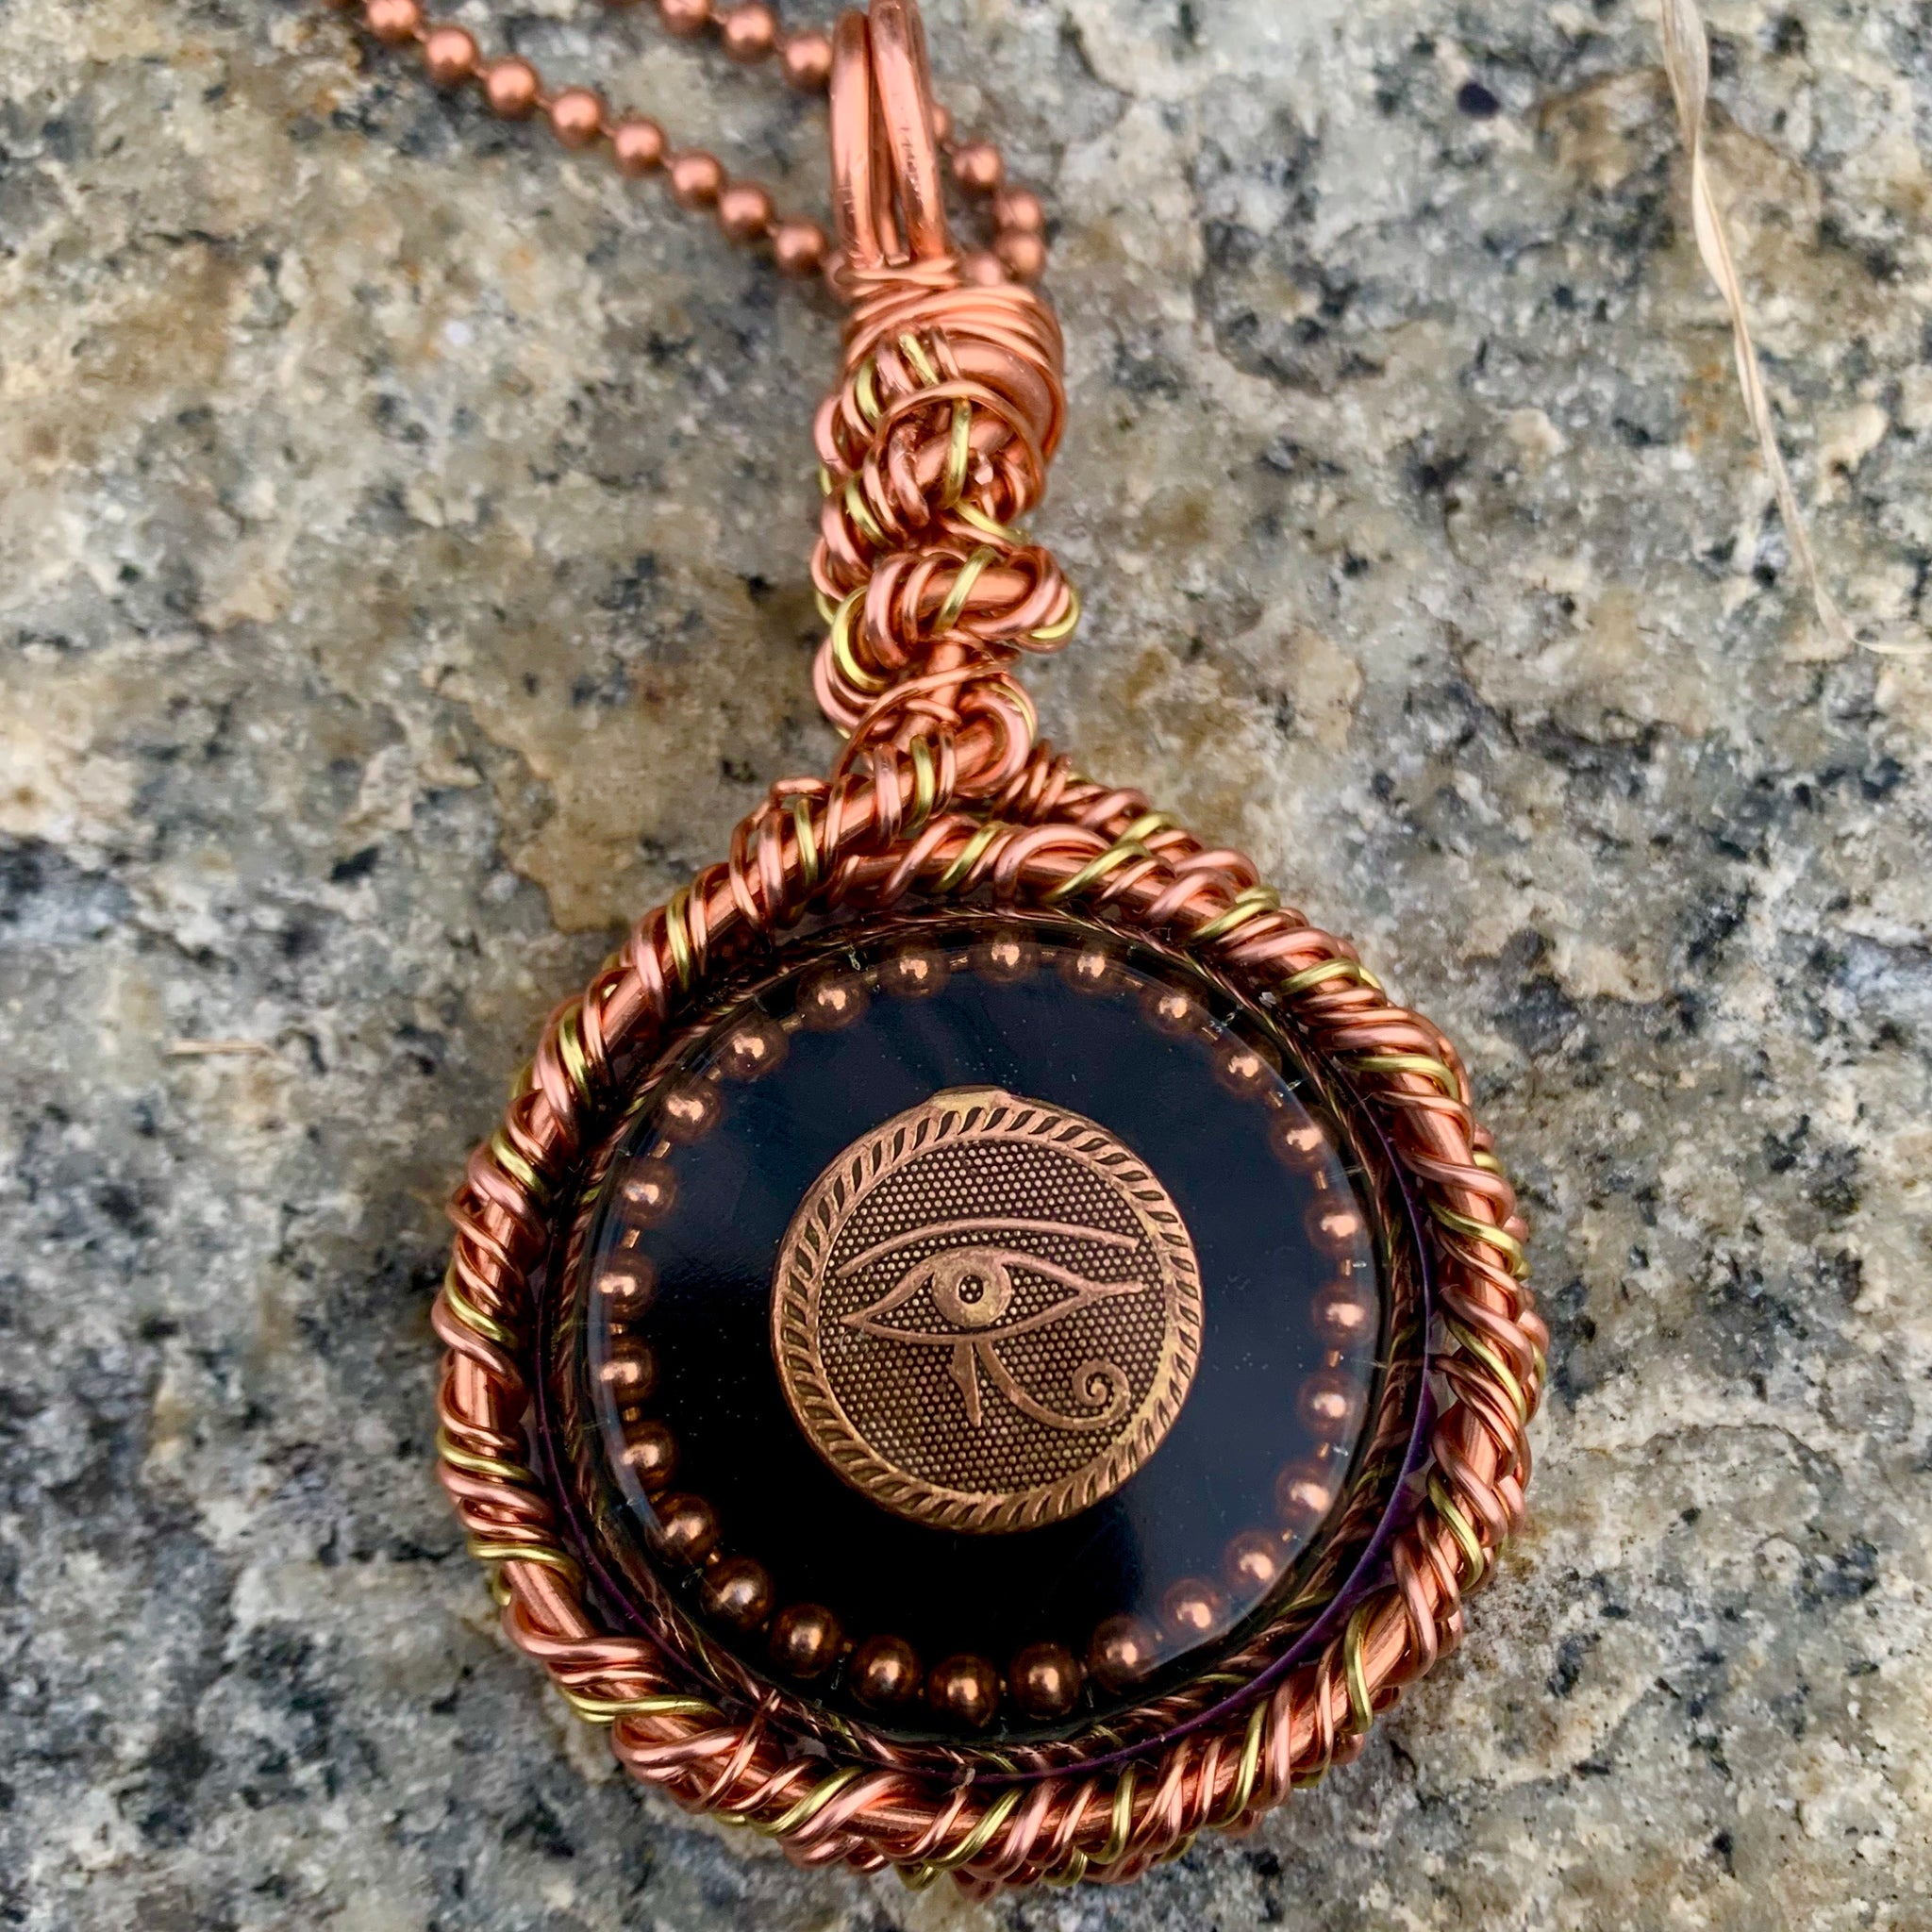 Activated Charcoal x Copper Amulet